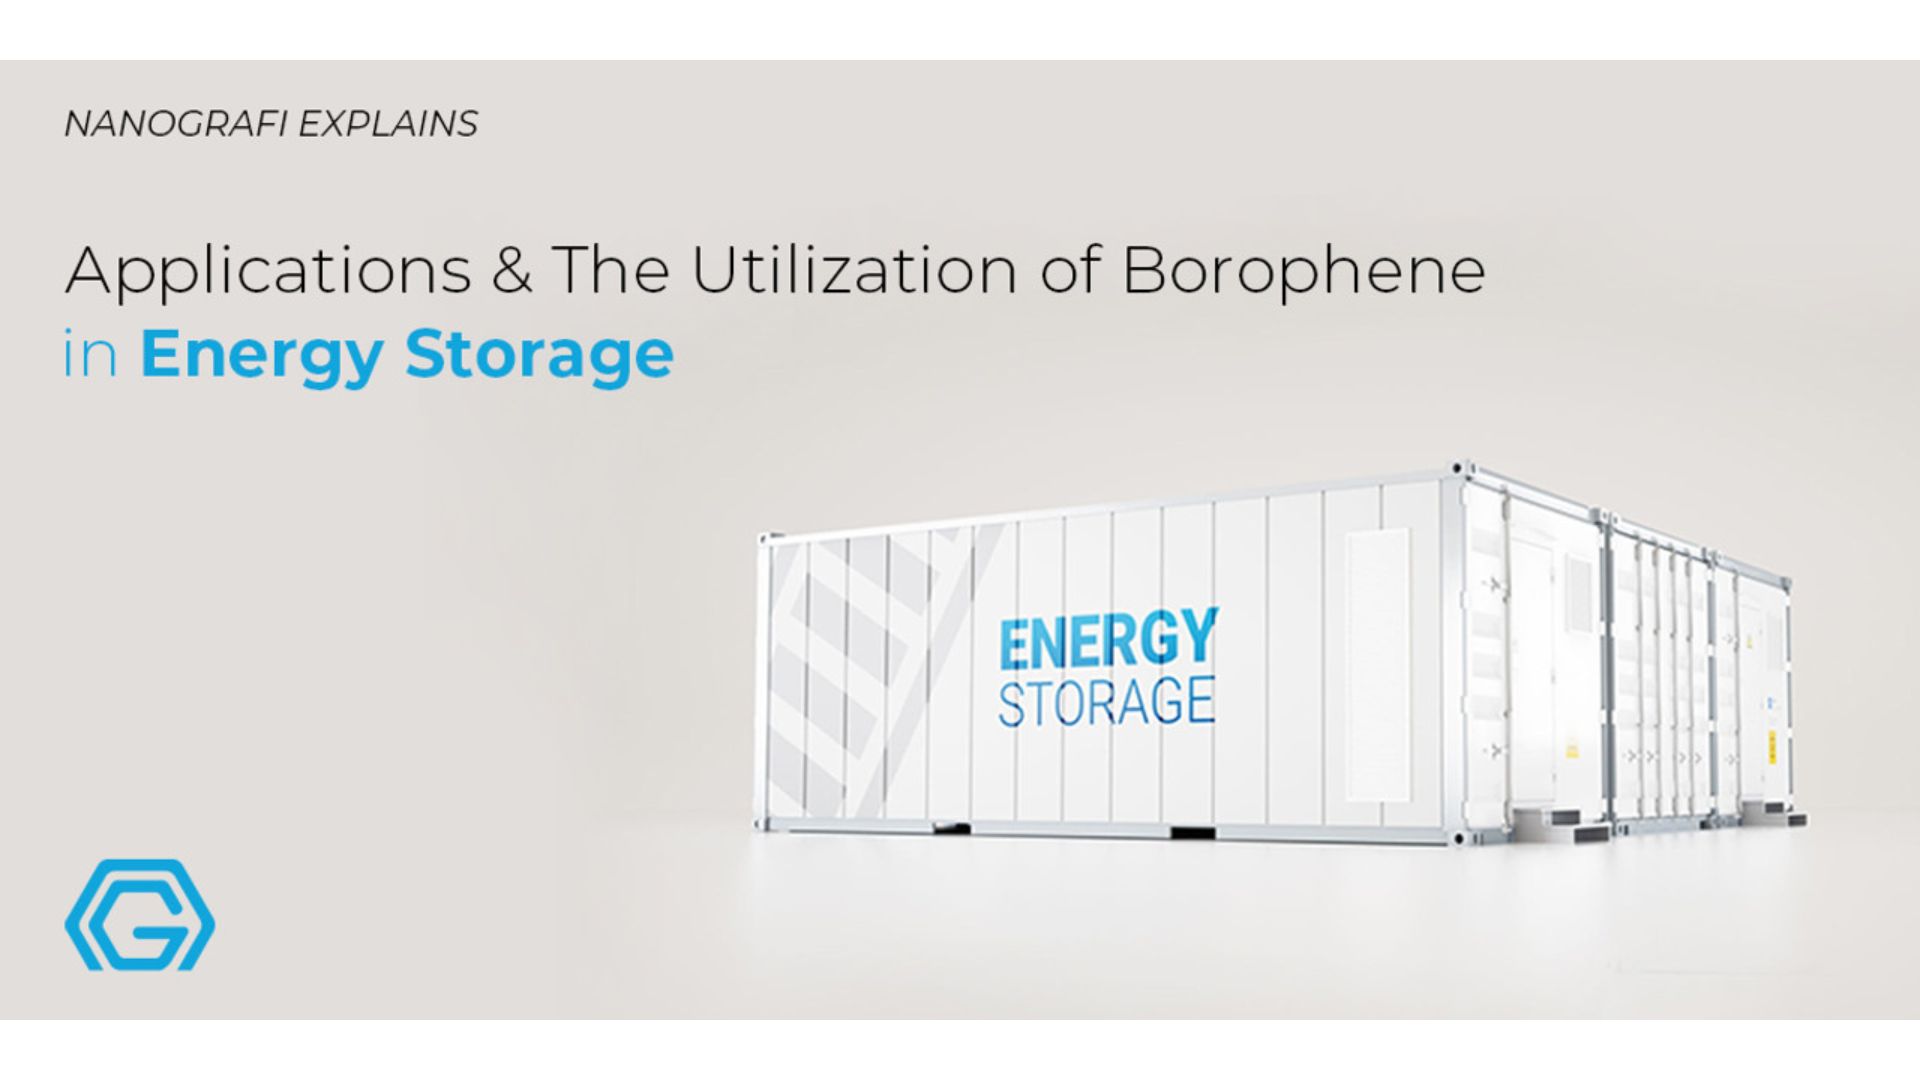 Applications and the utilization of borophene in energy storage